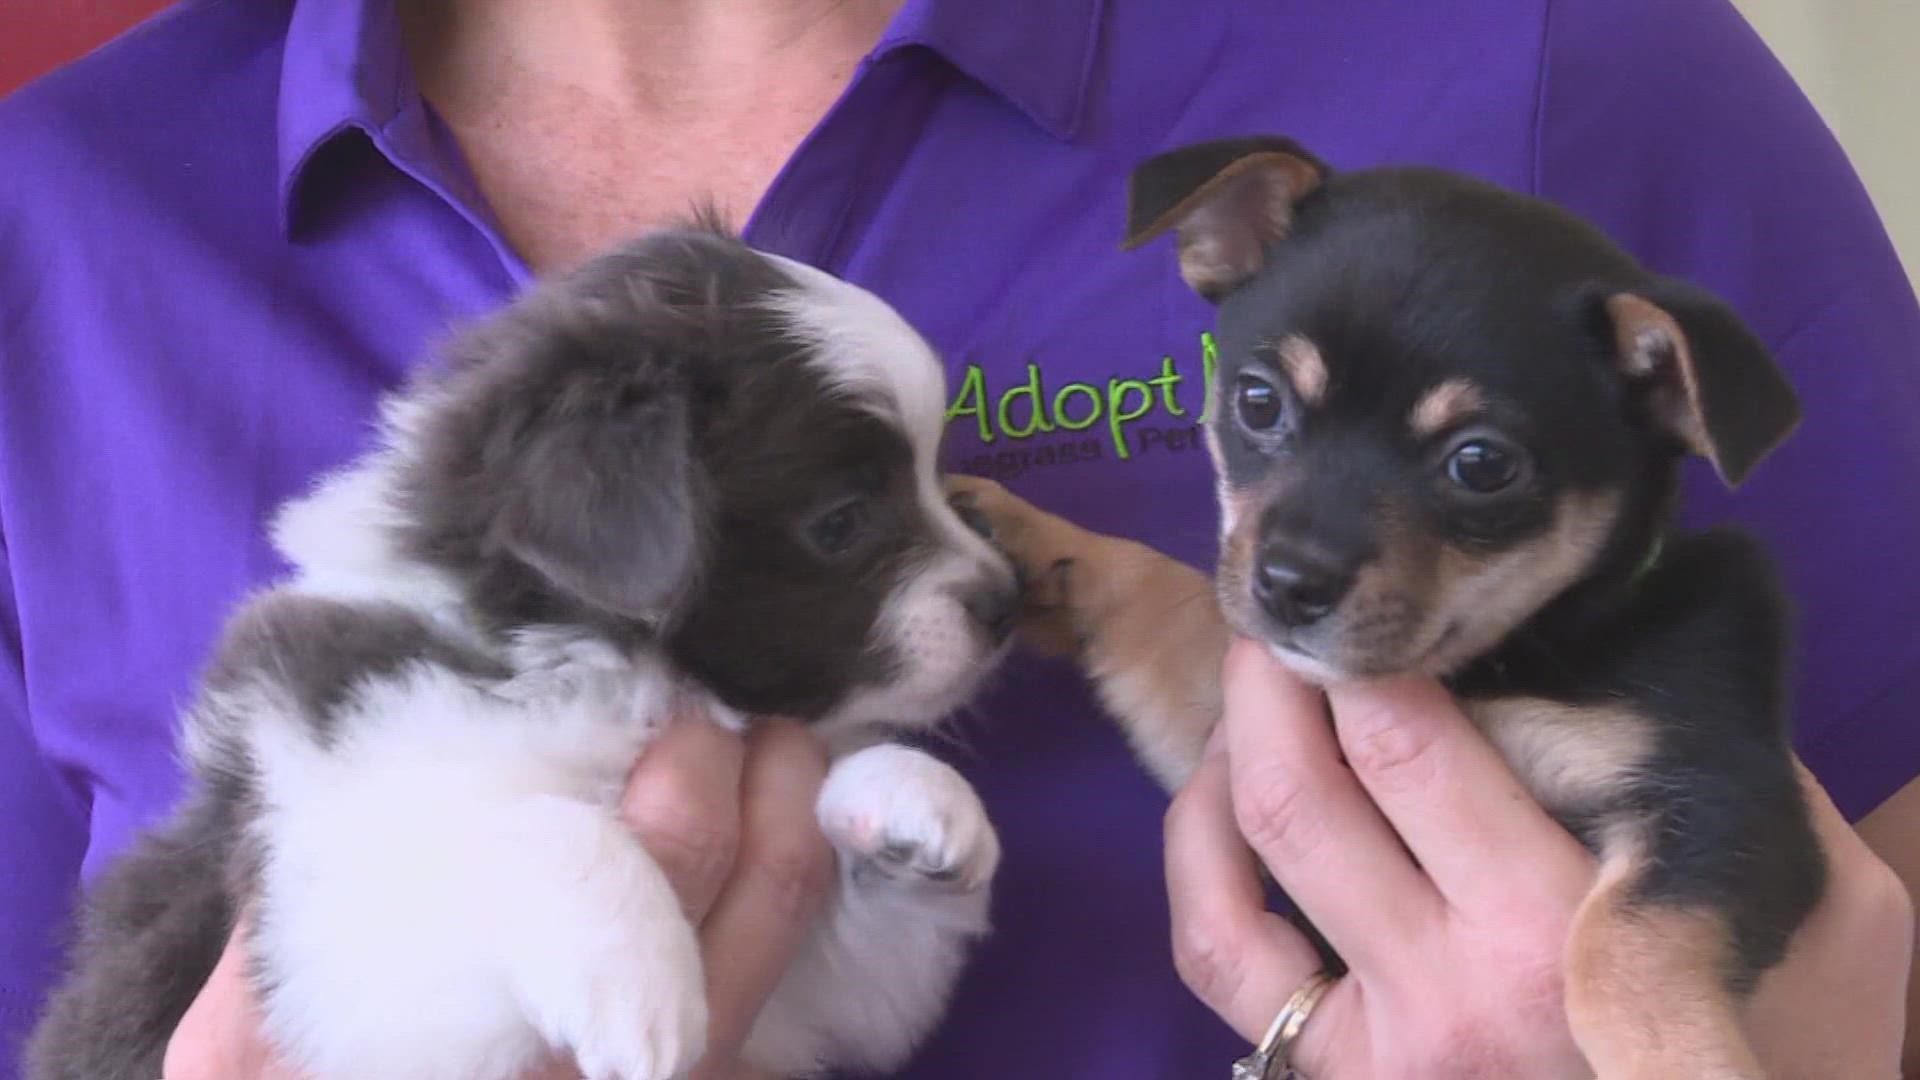 Donating to Adopt Me! Bluegrass Pet Rescue; Give for Good 2022 